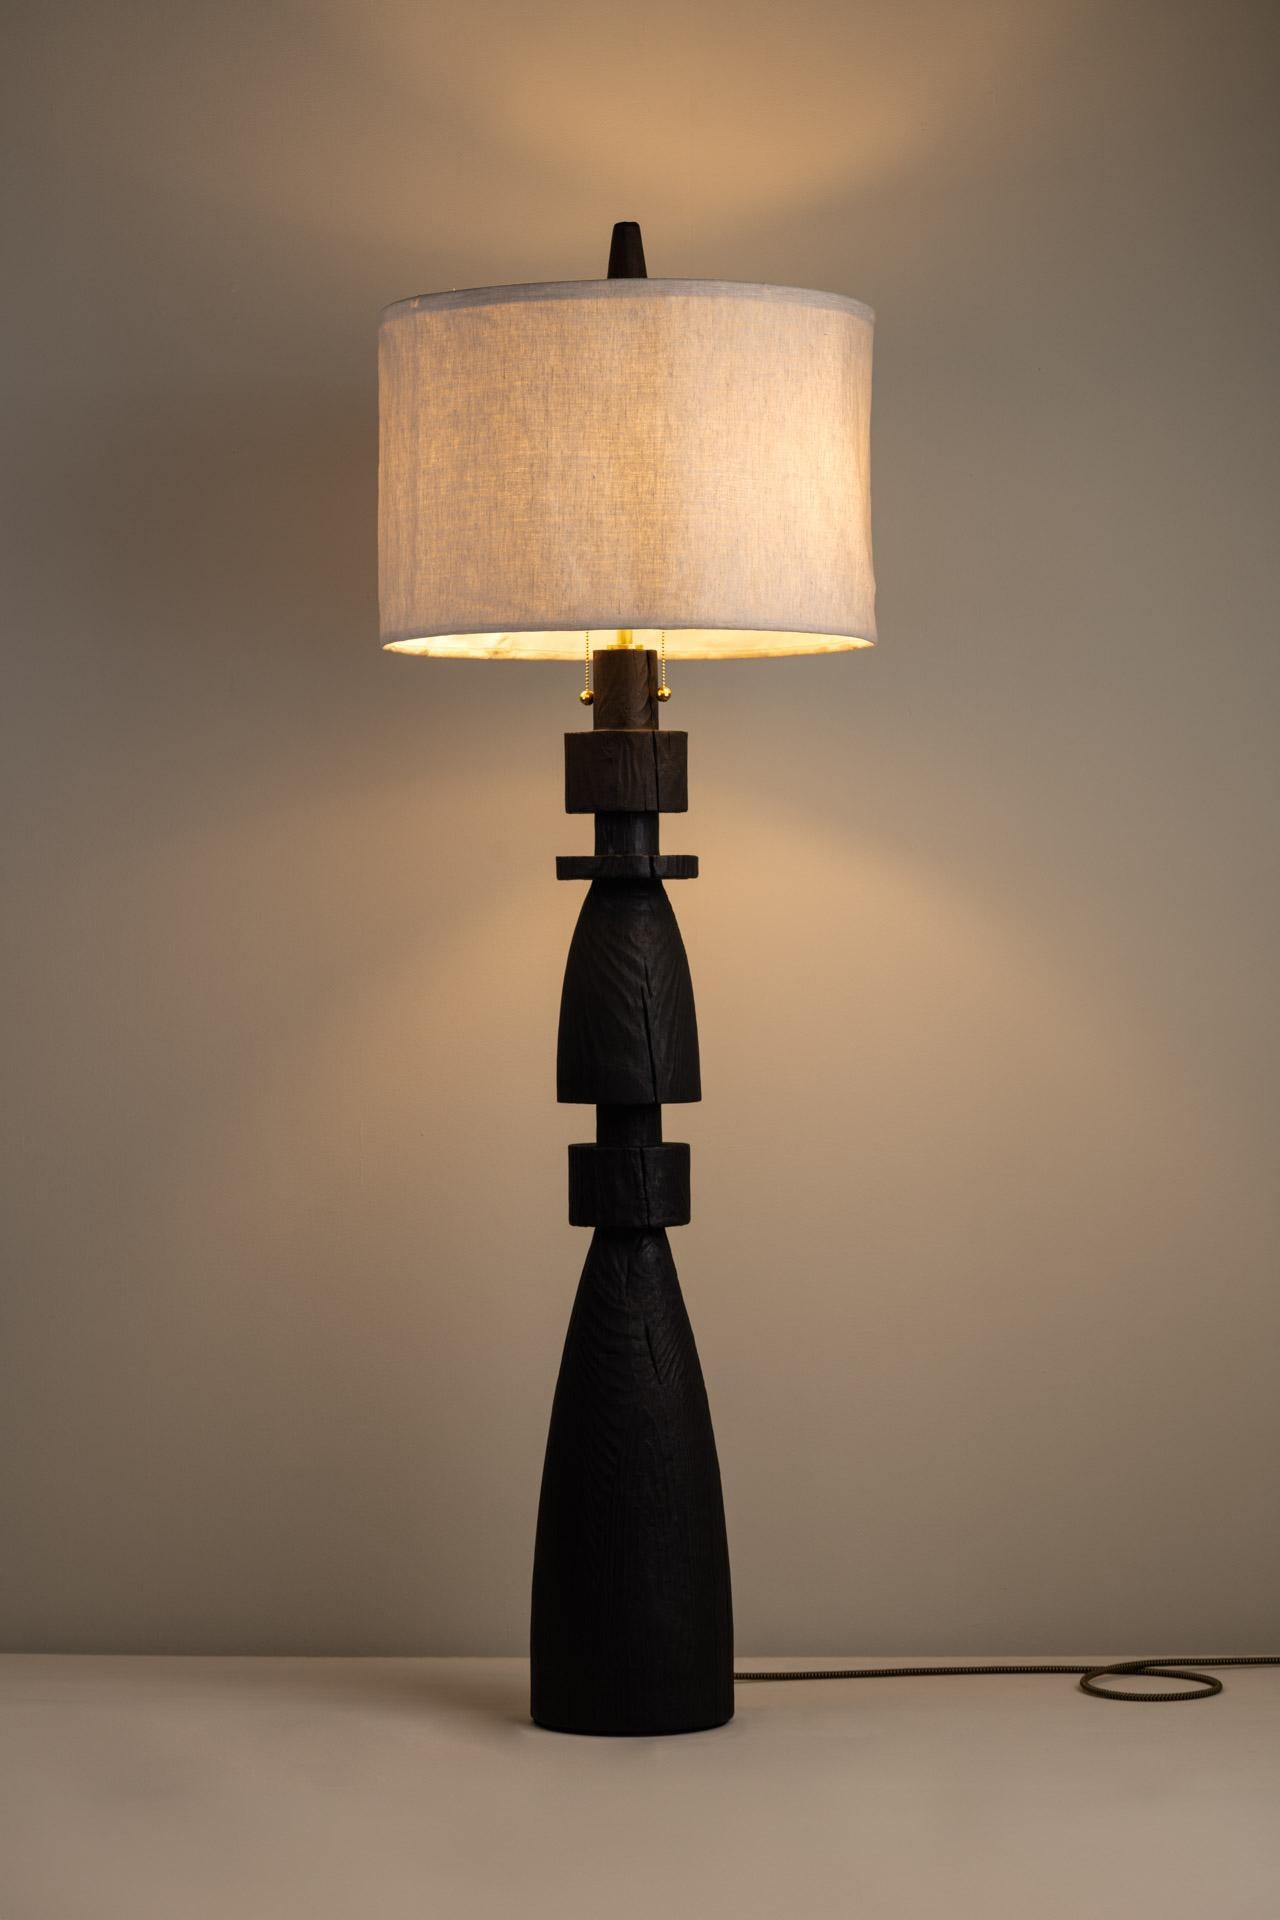 MEZQUITE (LARGE) floor lamp was designed for the De Palo collection by Mexican artist Isabel Moncada.

Like a chess bishop, Mezquite makes its presence felt in a resounding manner. It has a sturdy wood base, its dark finish gives great character and